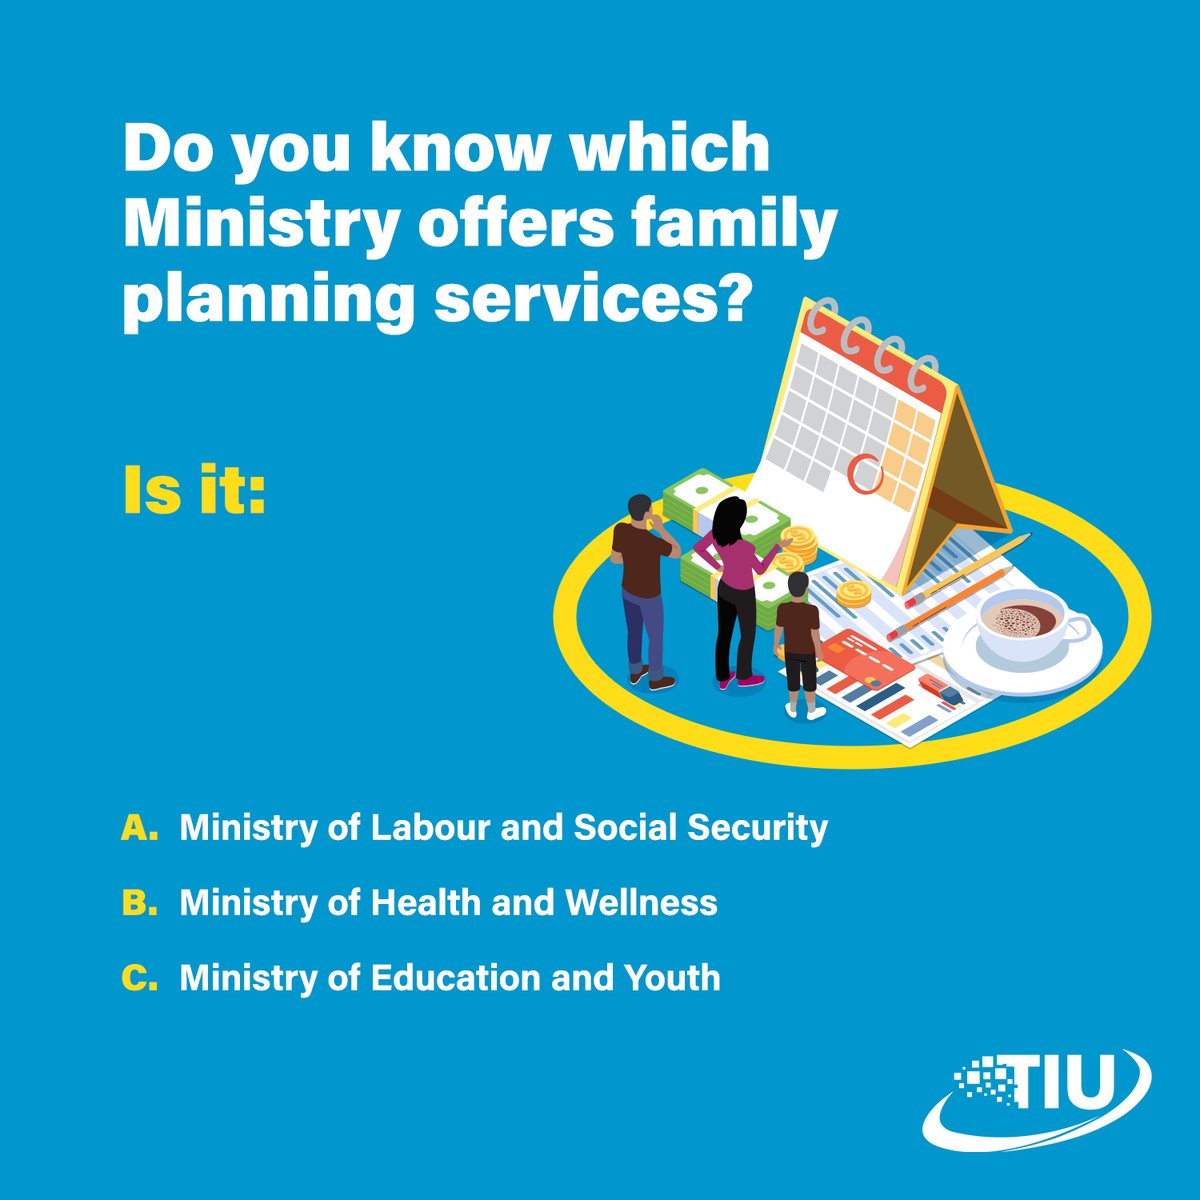 Under the Rationalisation of Public Bodies Project, the functions of the National Family Planning Board (NFPB) were merged into a Ministry.  This approach eliminates duplication of work, saving taxpayers millions.
Do you know into which Ministry the NFPB was integrated?